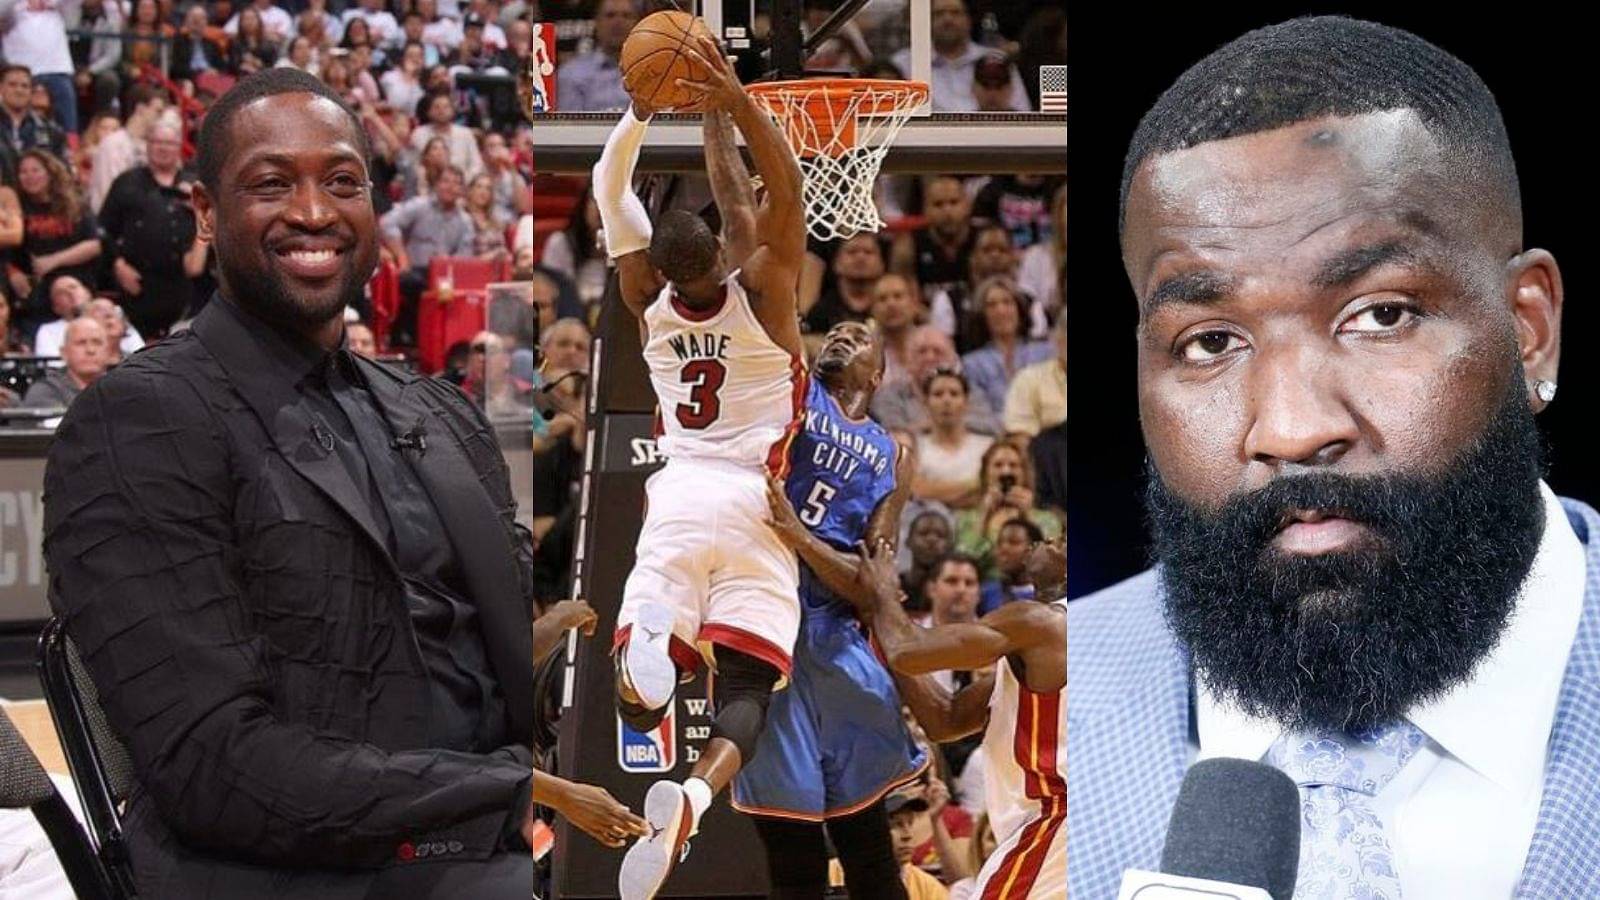 "I was ready to fight Kendrick Perkins .. he should’ve wrapped his legs around me”: Dwyane Wade, the 6’4” TNT analyst posterized 6’10” ESPN analyst back in the day